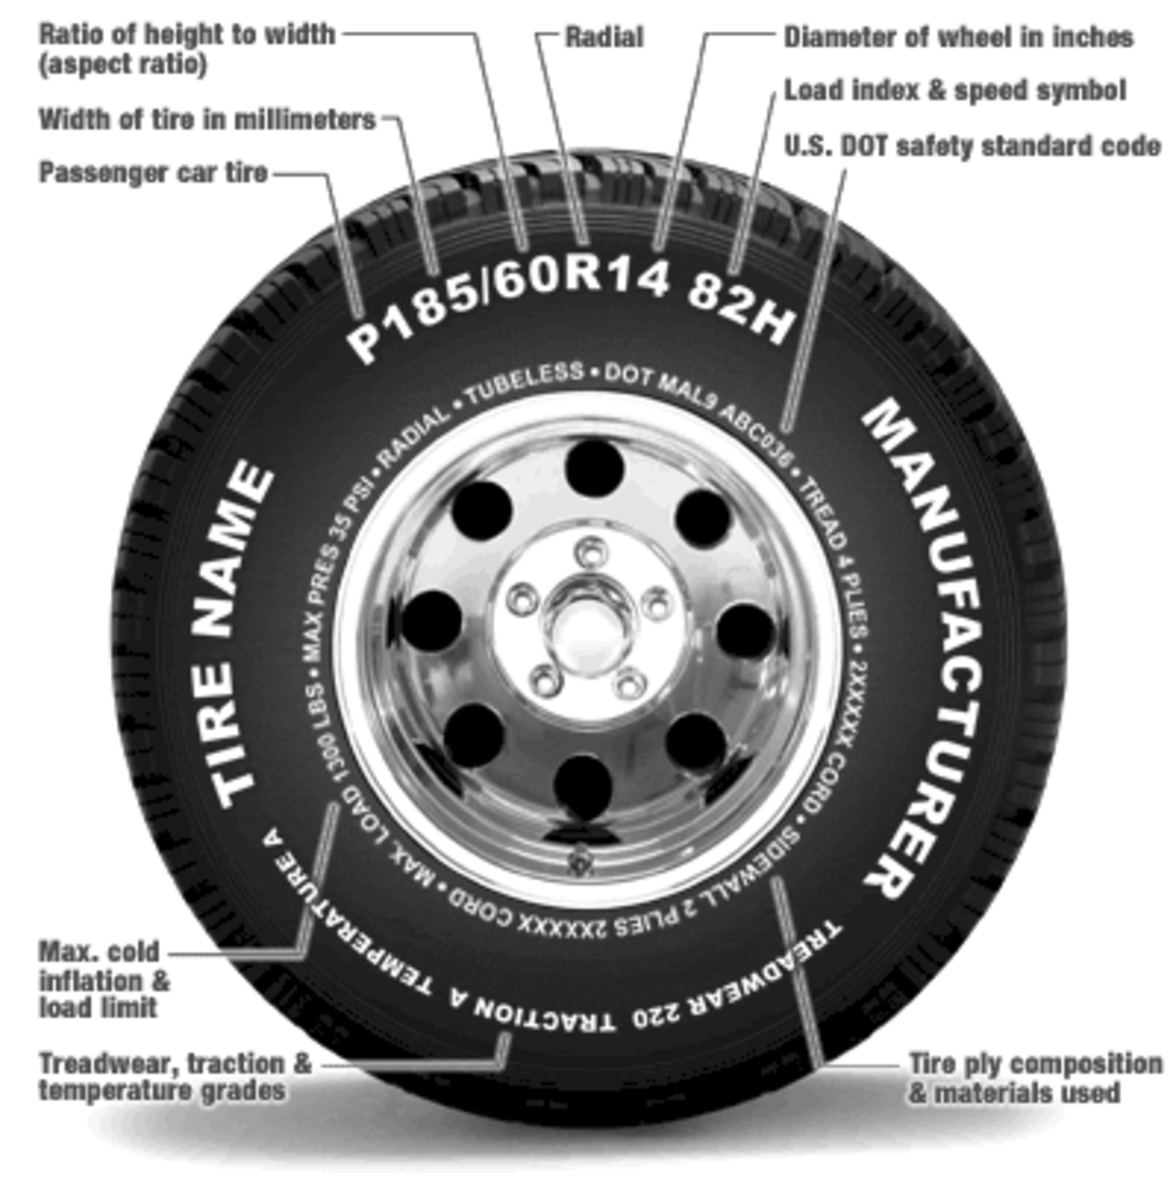 A nice illustrated guide to reading a tire sidewall